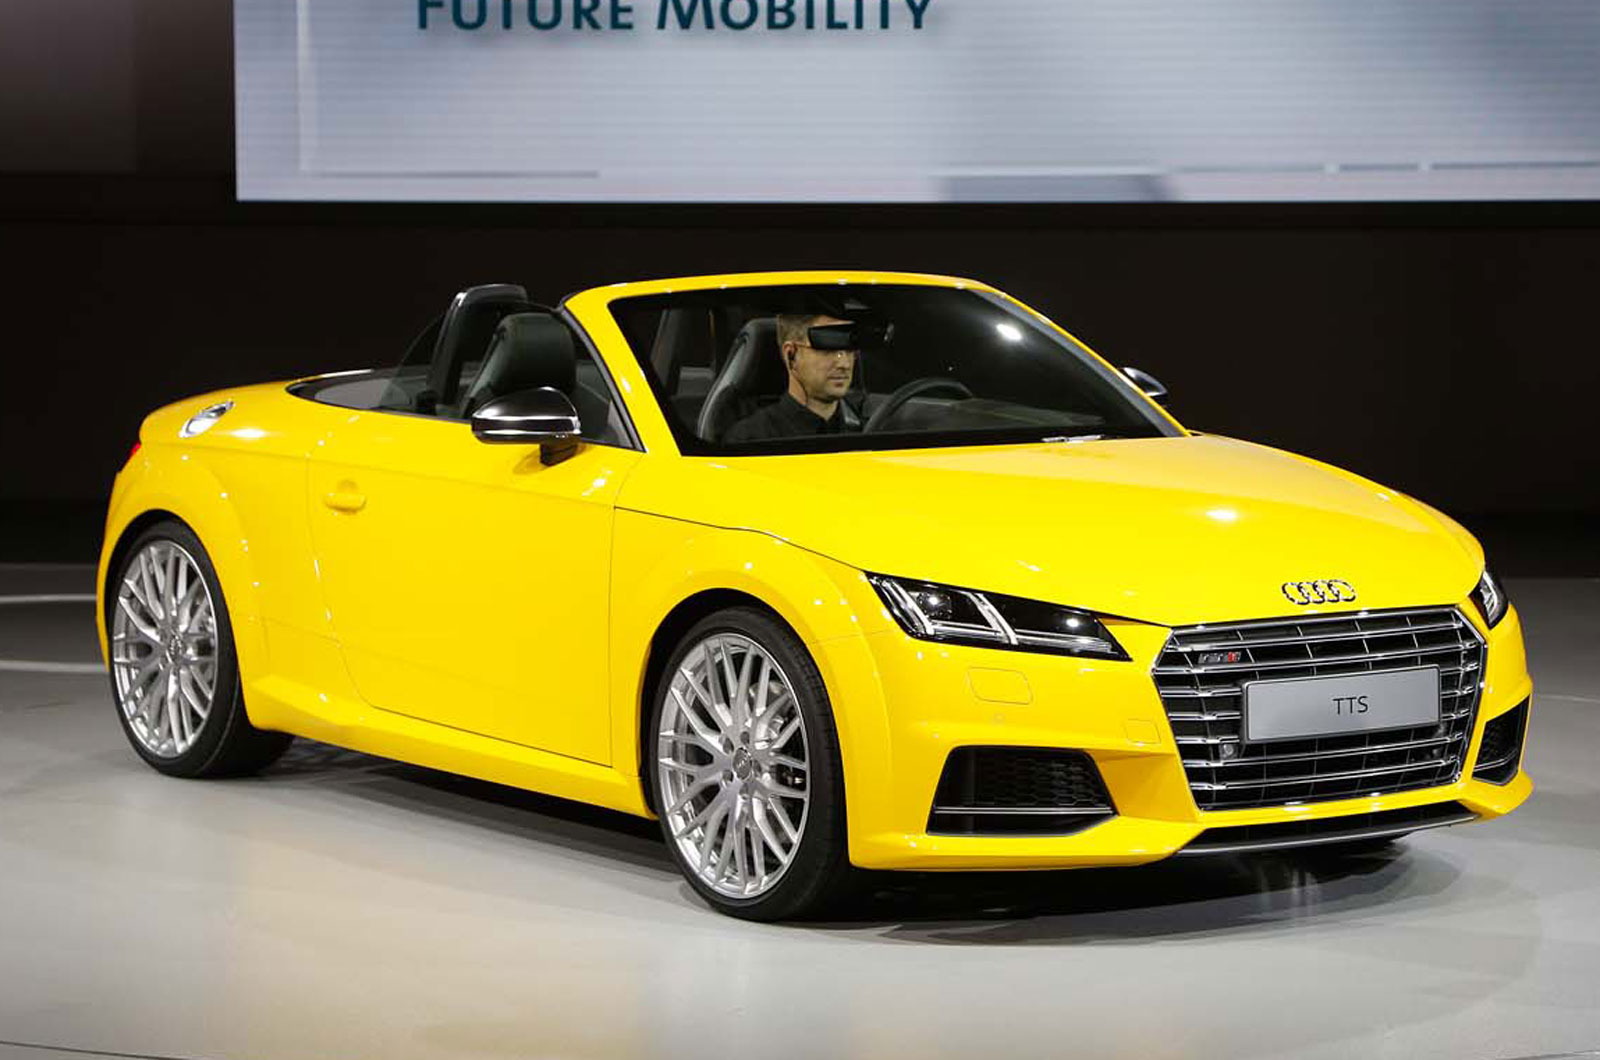 2015 Audi TT Roadster - pricing and engines | Autocar